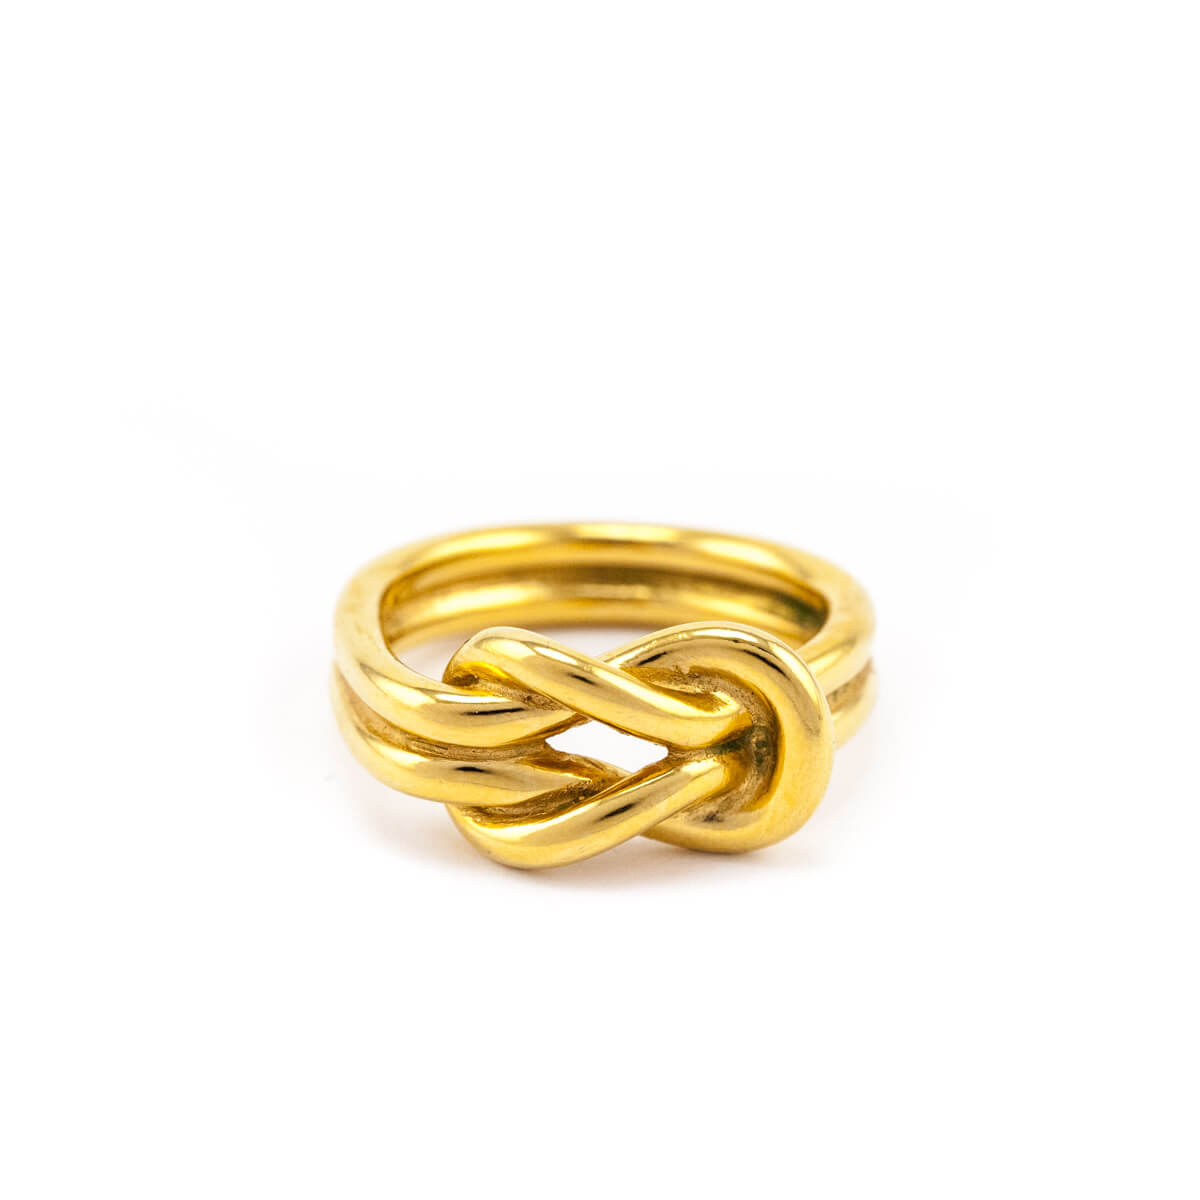 Hermes Gold Knot Scarf Ring